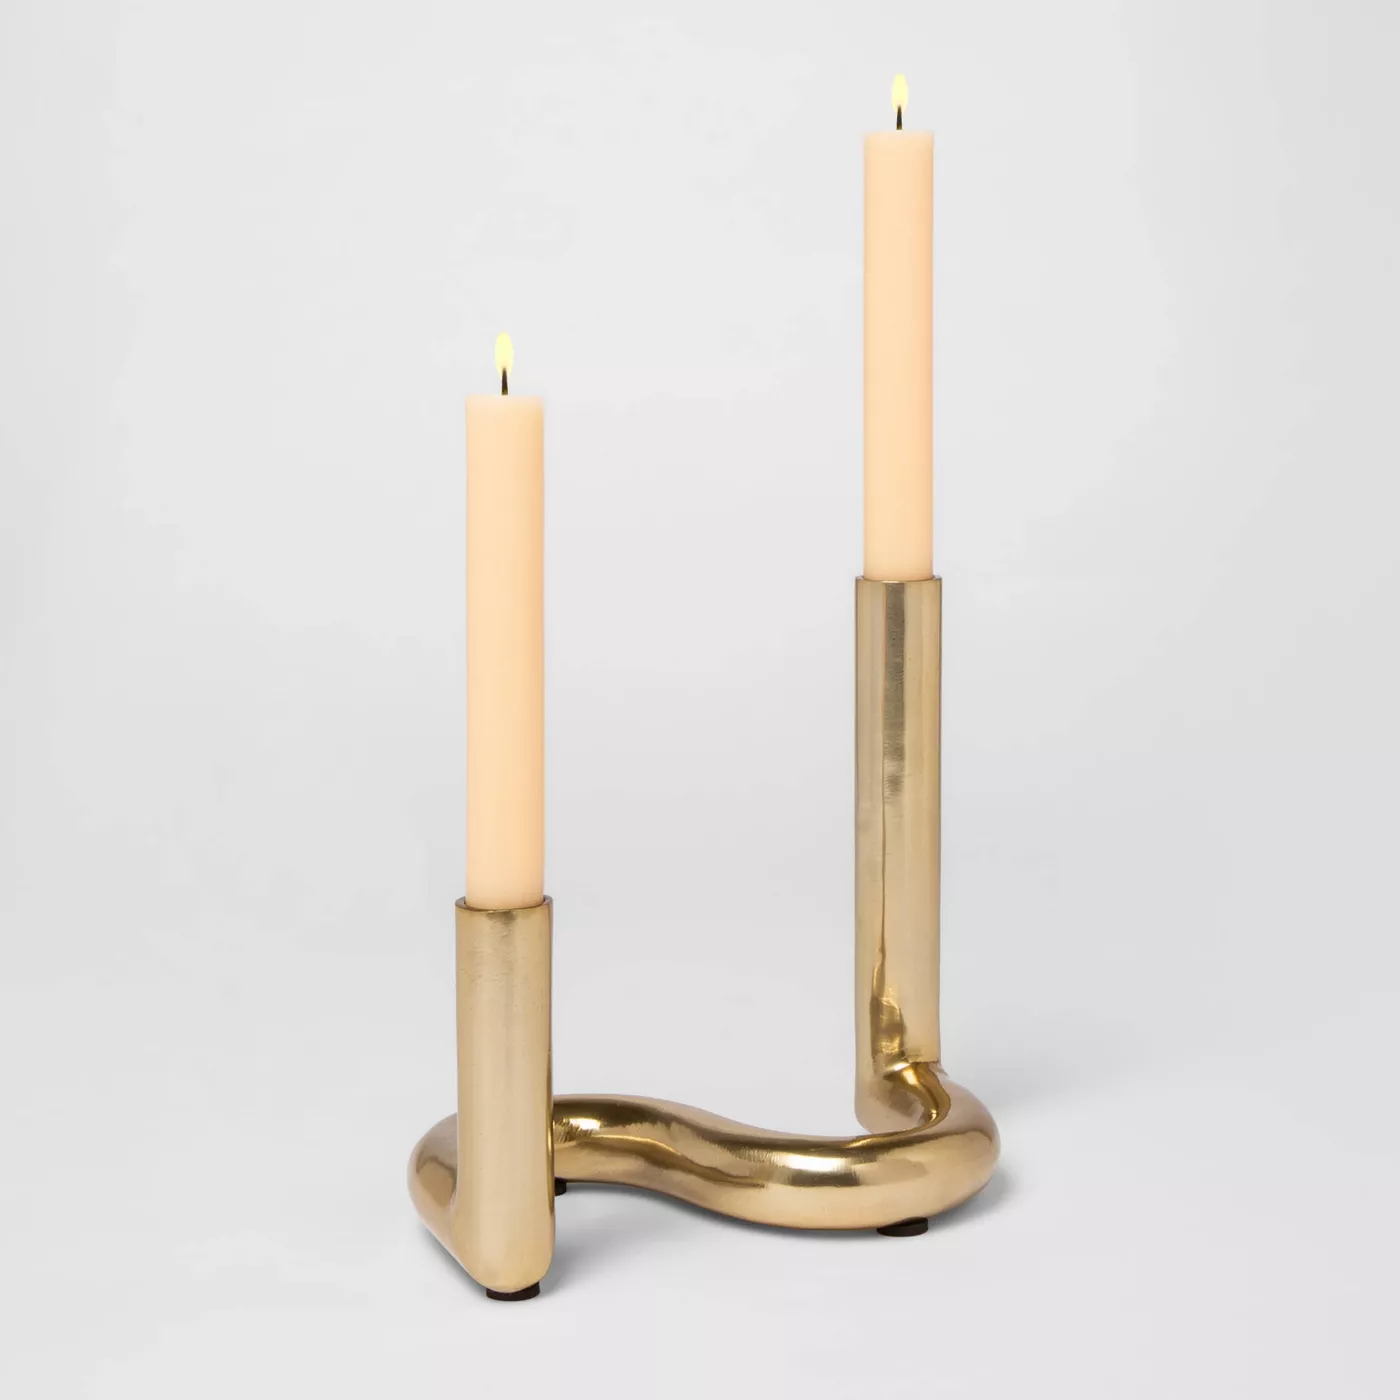 Shop 26" x 9.5" Brass Taper Two-Candle Holder Gold - Project 62 from Target on Openhaus